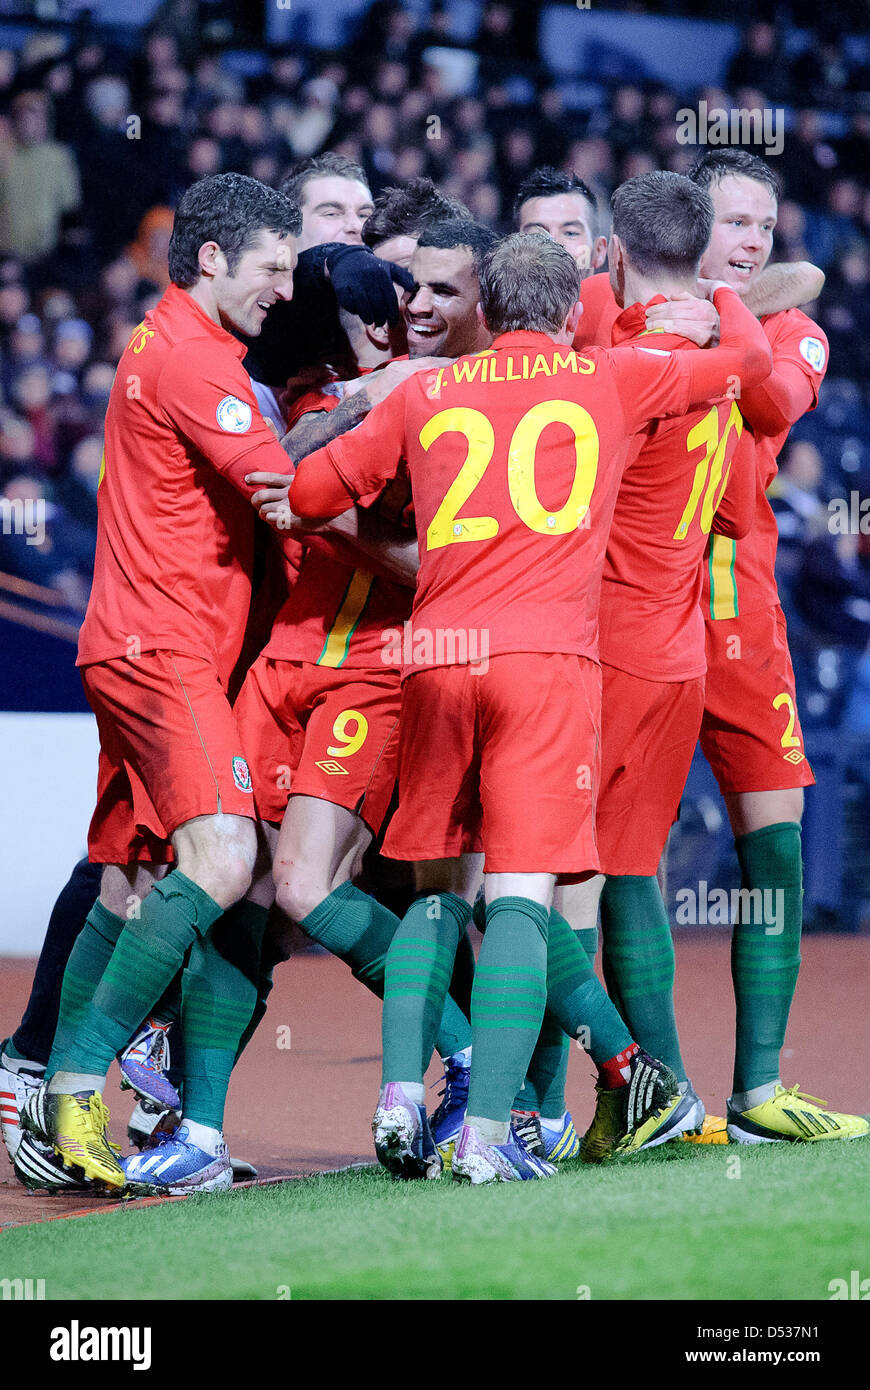 Glasgow, Scotland, UK. 22nd March 2013. Hal Robson-Kanu (9) celebrate's scoring the winner for Wales during the World Cup 2014 Group A Qualifing game between Scotland and Wales at Hampden Park Stadium. Credit: Colin Lunn / Alamy Live News Stock Photo